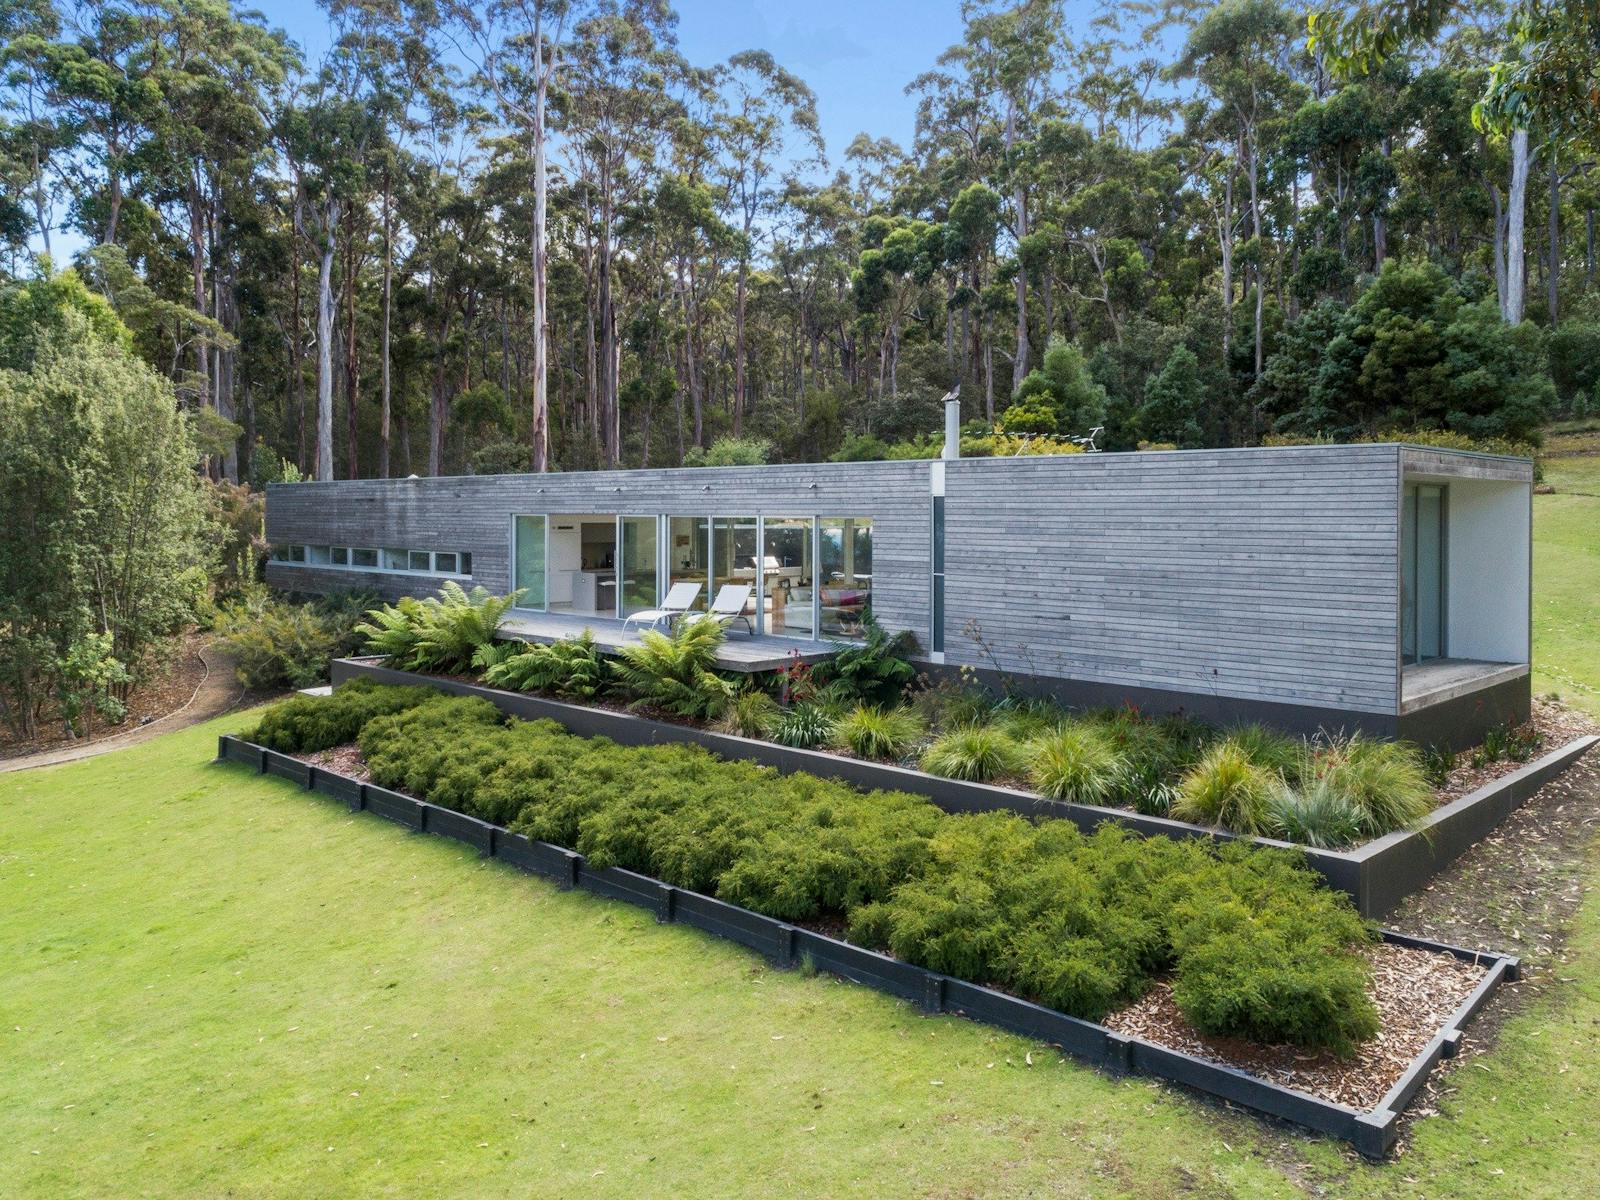 The house is architecturally designed and blends beautifully with the natural surrounds.